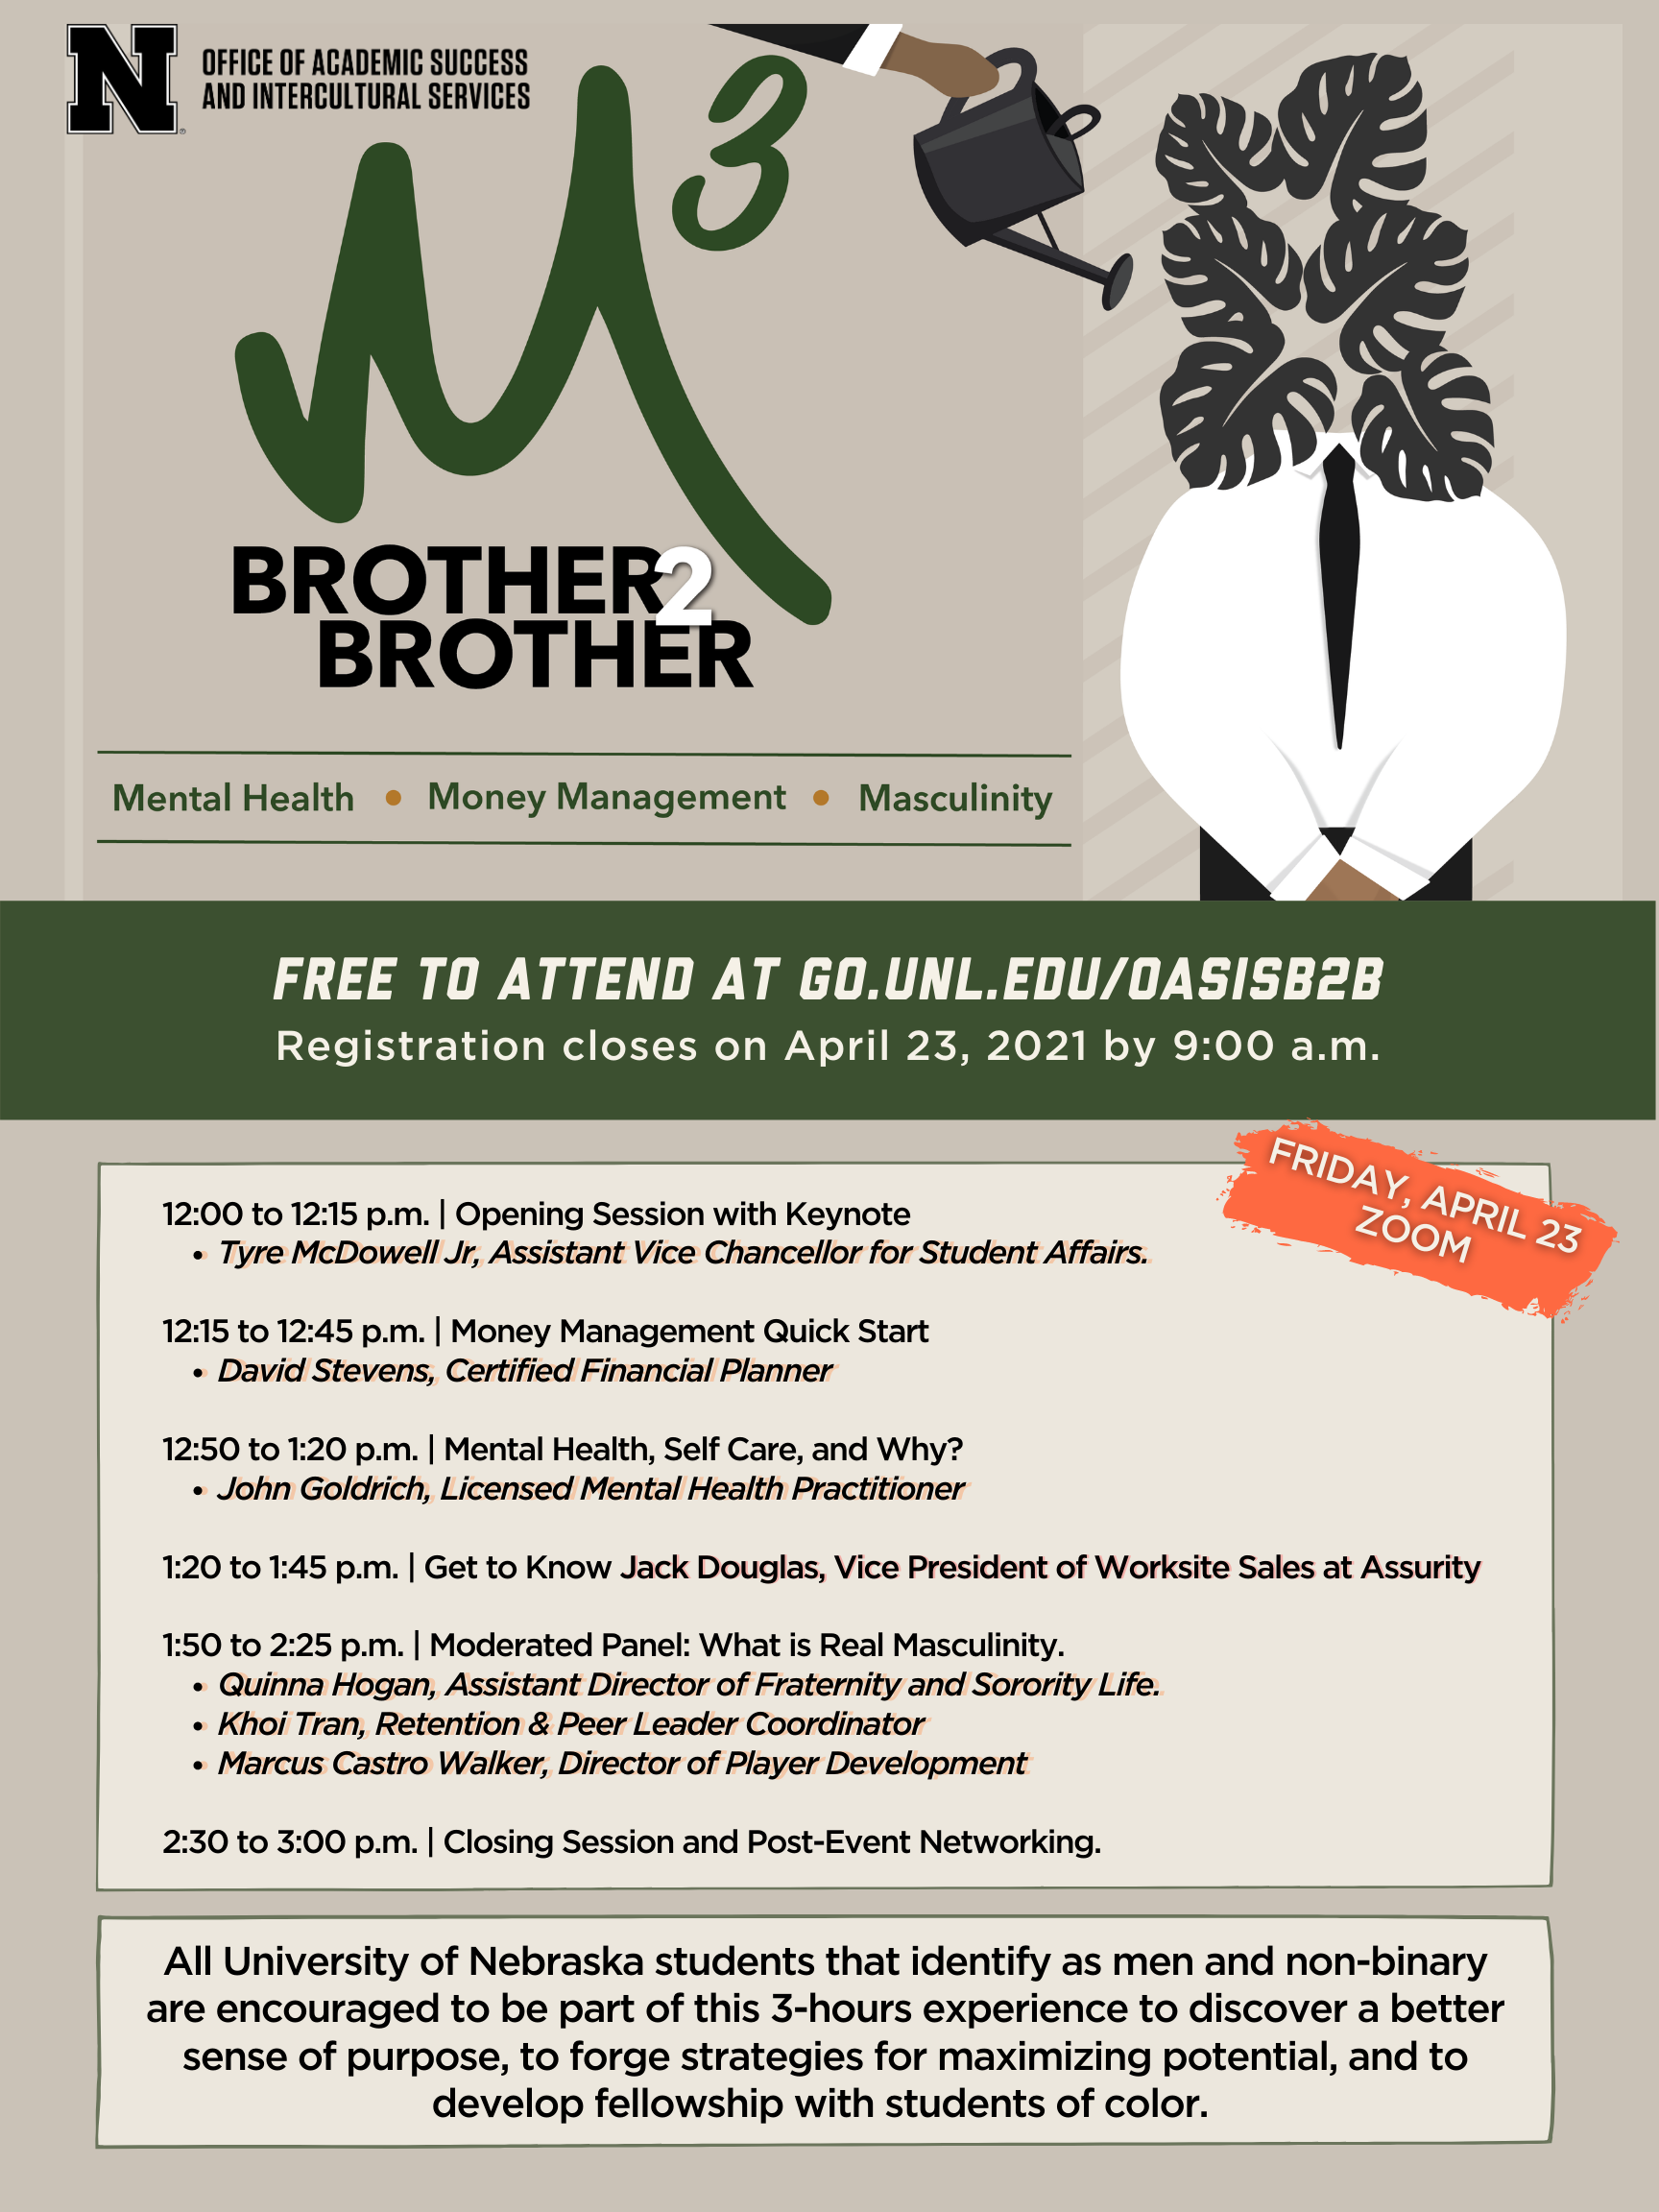 OASIS's Brother2Brother is excited to invite students for open dialogues with special guest speakers on Friday, April 23, 2021 from noon to 3 p.m. 